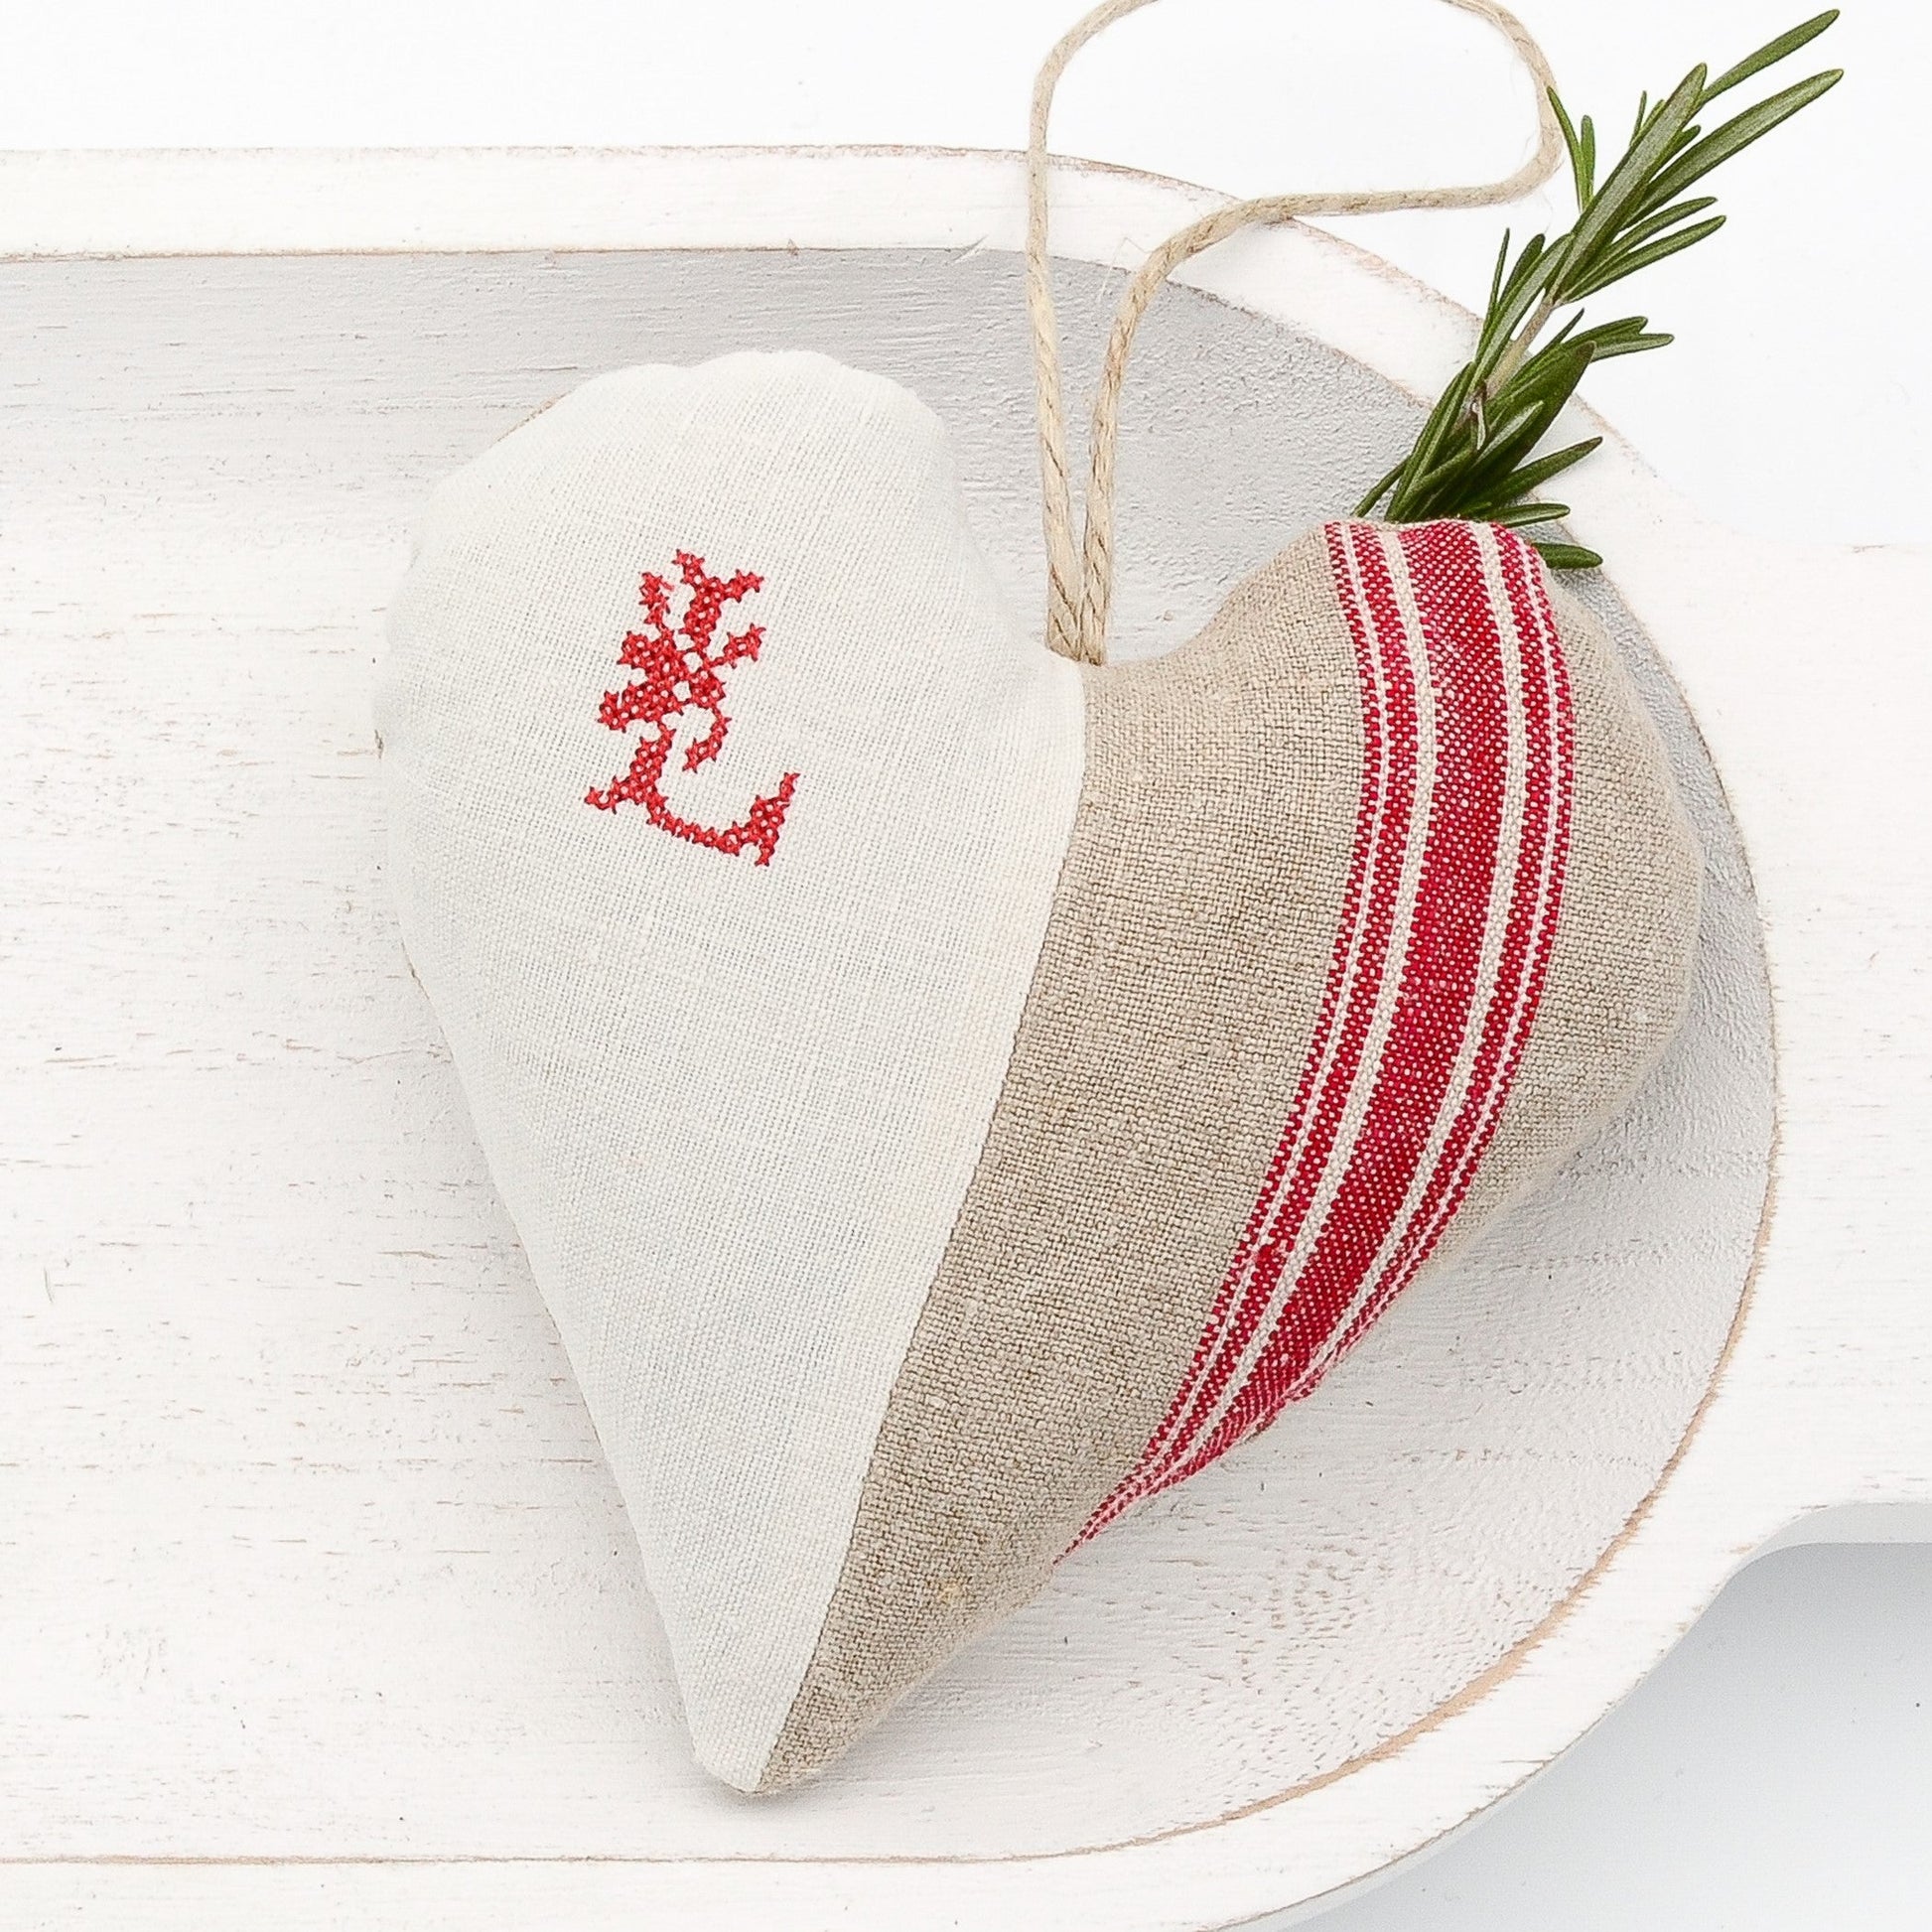 Antique European white linen and red-striped German mangle cloth natural tone linen lavender sachet heart, letter "L" monogram (all letters available) embroidered in red cross stitch, hemp twine tie, filled with high quality lavender from Provence France